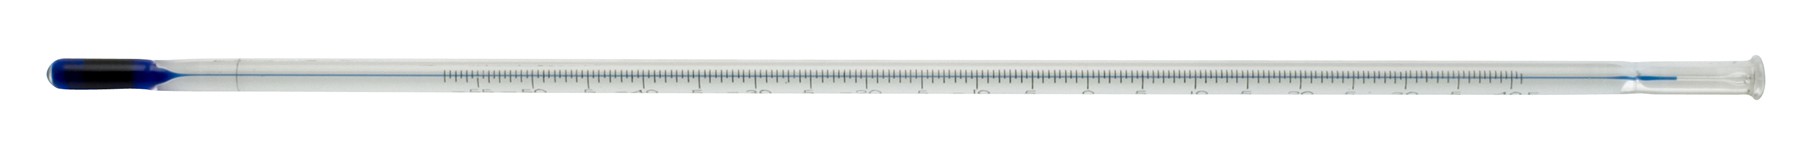 H-B DURAC Plus ASTM Like Liquid-In-Glass Thermometer; 12C / Density-Wide Range, Total Immersion, -20 to 102C, Organic Liquid Fill